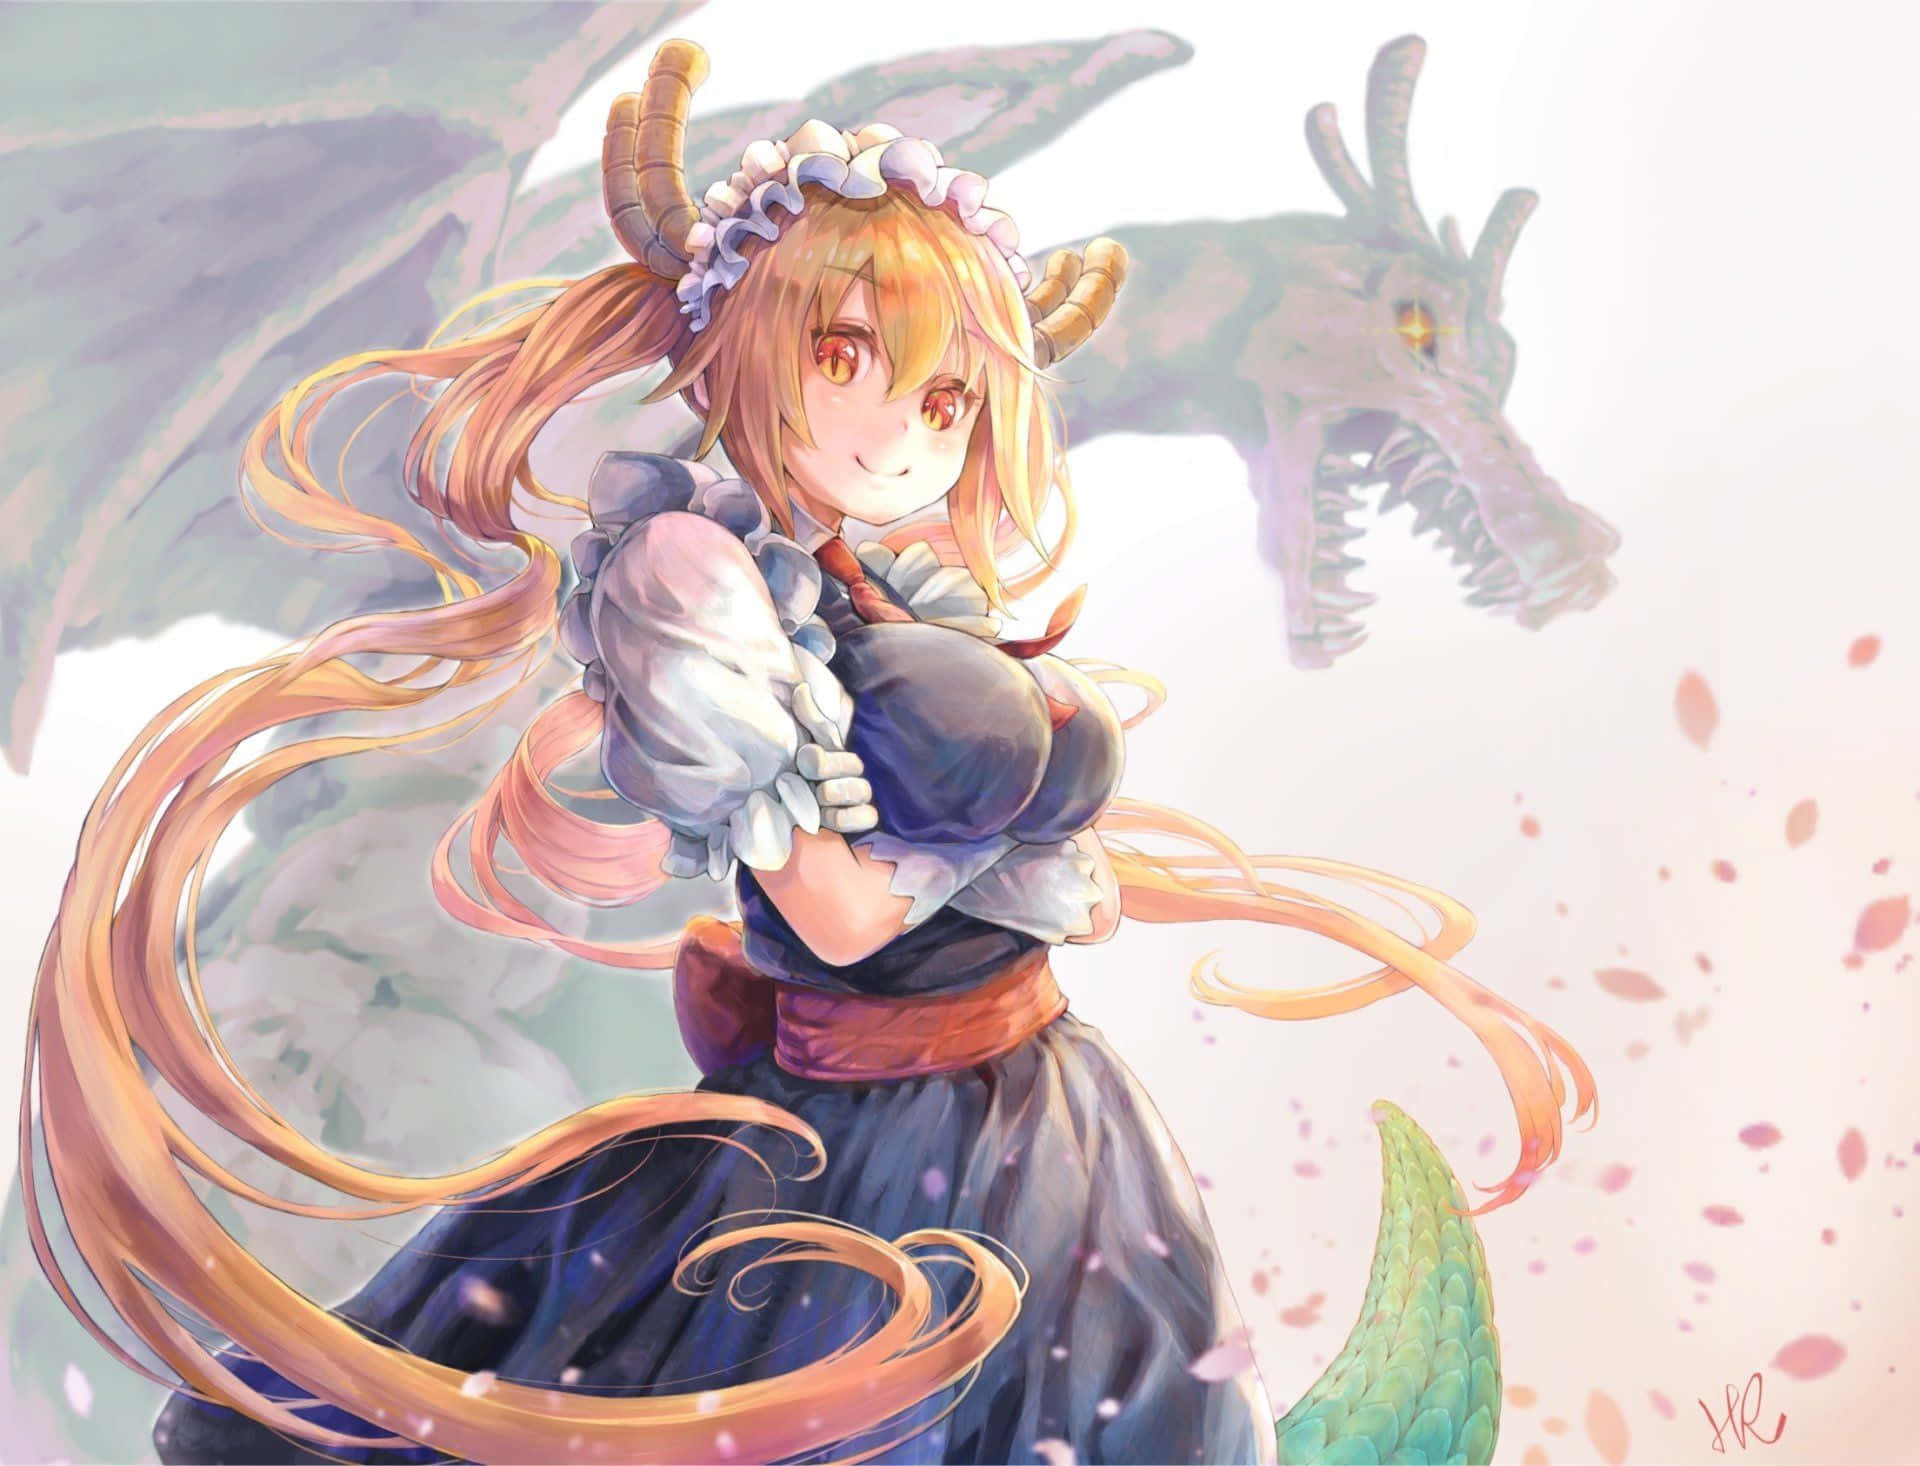 "The adventures of Miss Kobayashi and her magical dragon maid." Wallpaper